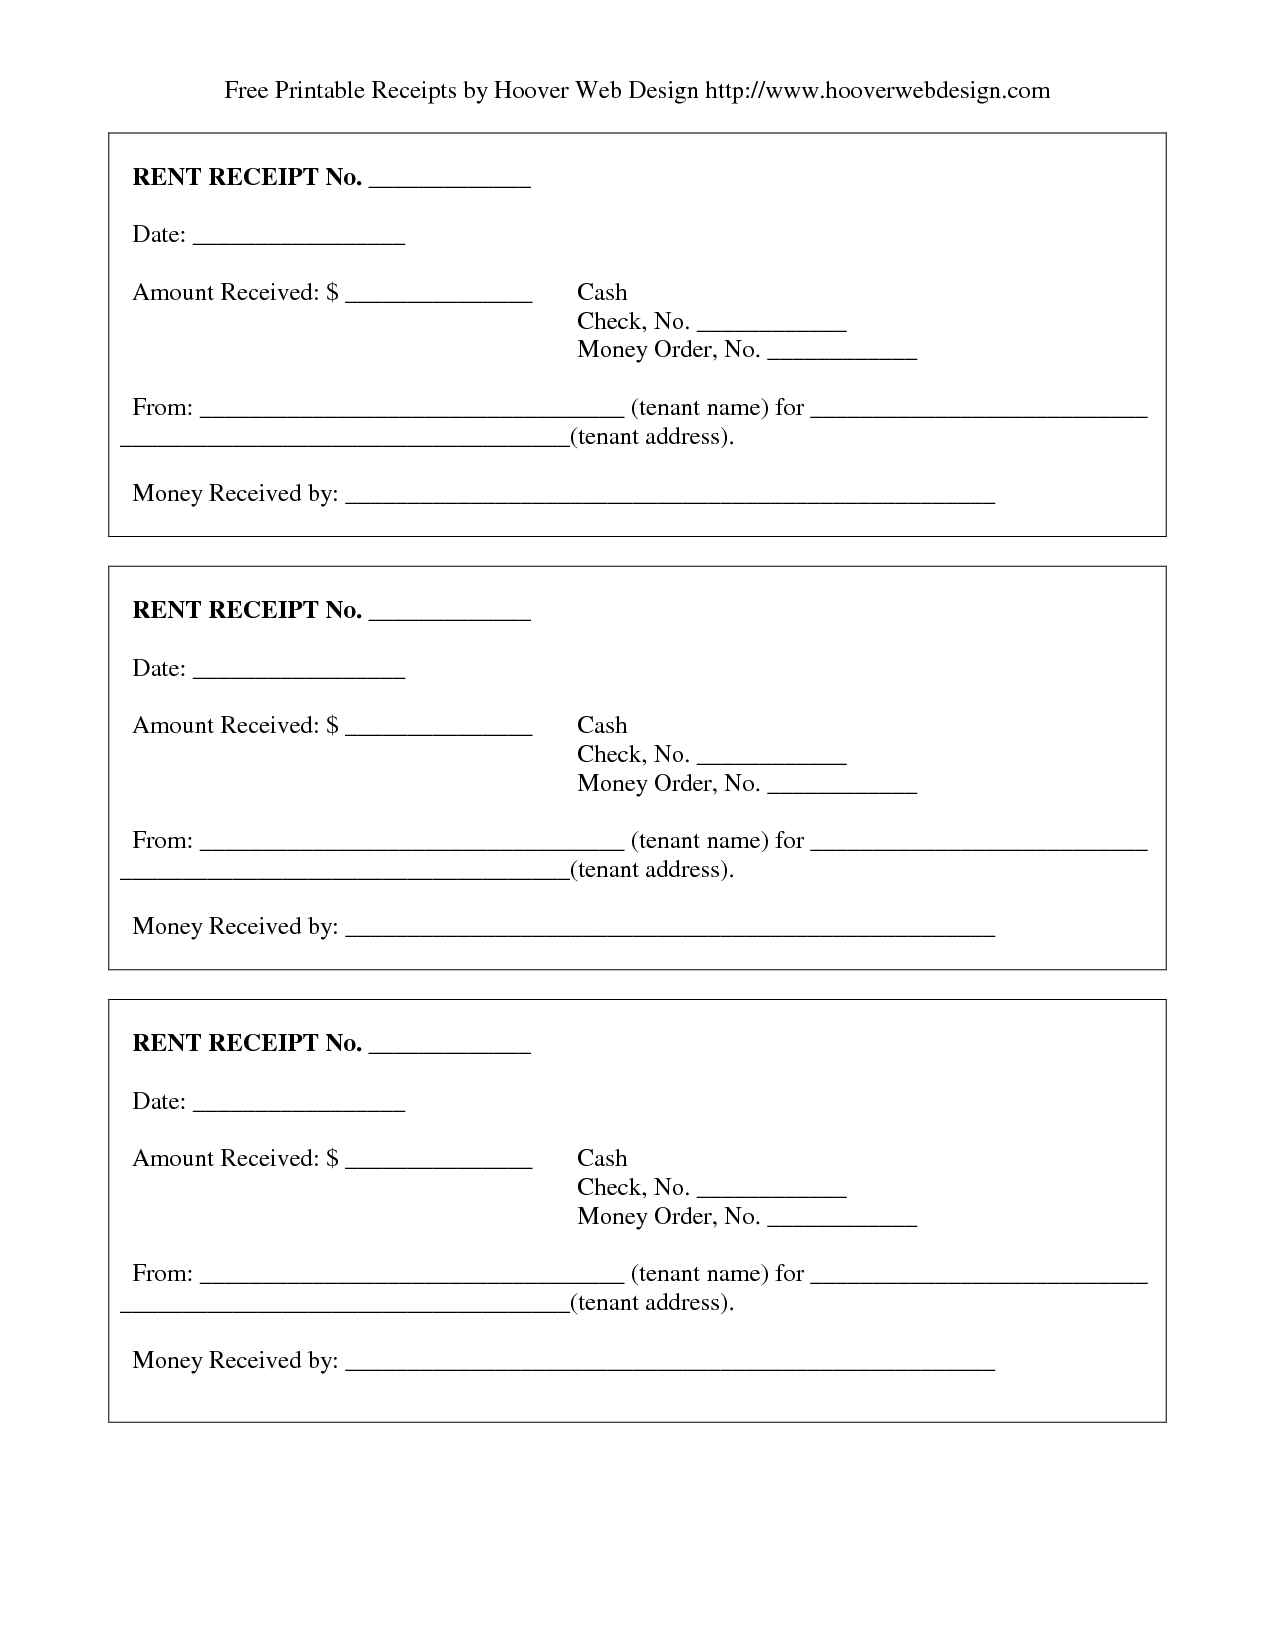 free-fillable-printable-rent-receipts-templates-printable-download